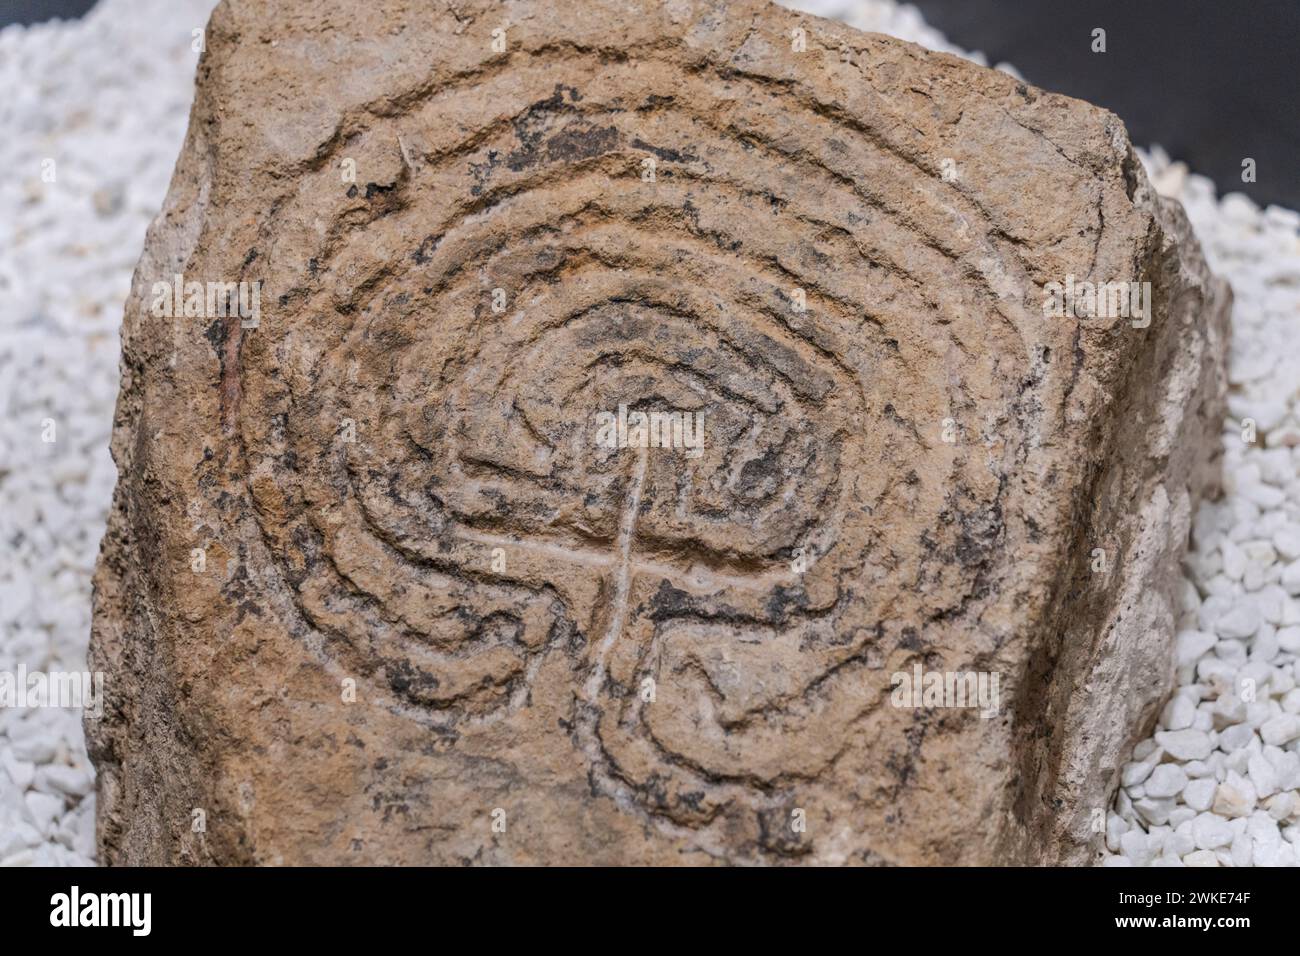 Labyrinth stele, 8th-11th centuries, Labyrinth engraved in stone, path of perfection for salvation, Romanesque church of San Pantaleón, Museum of prehistory and archeology (MUPAC), Santander, Cantabria, Spain. Stock Photo